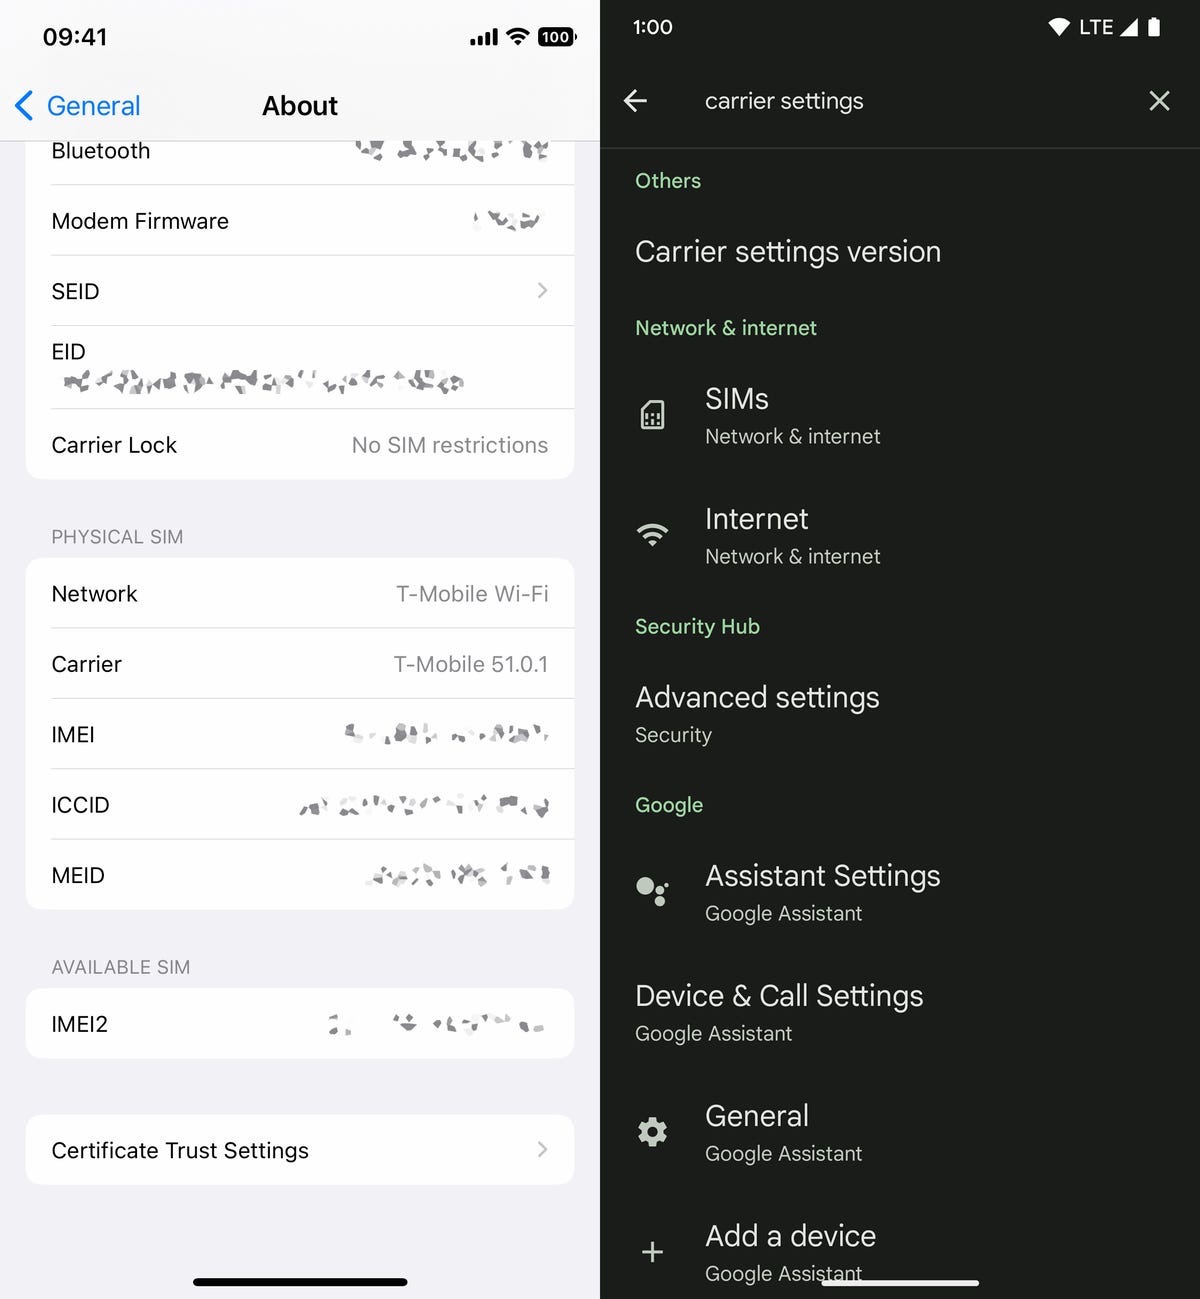 Carrier settings on iOS and Android